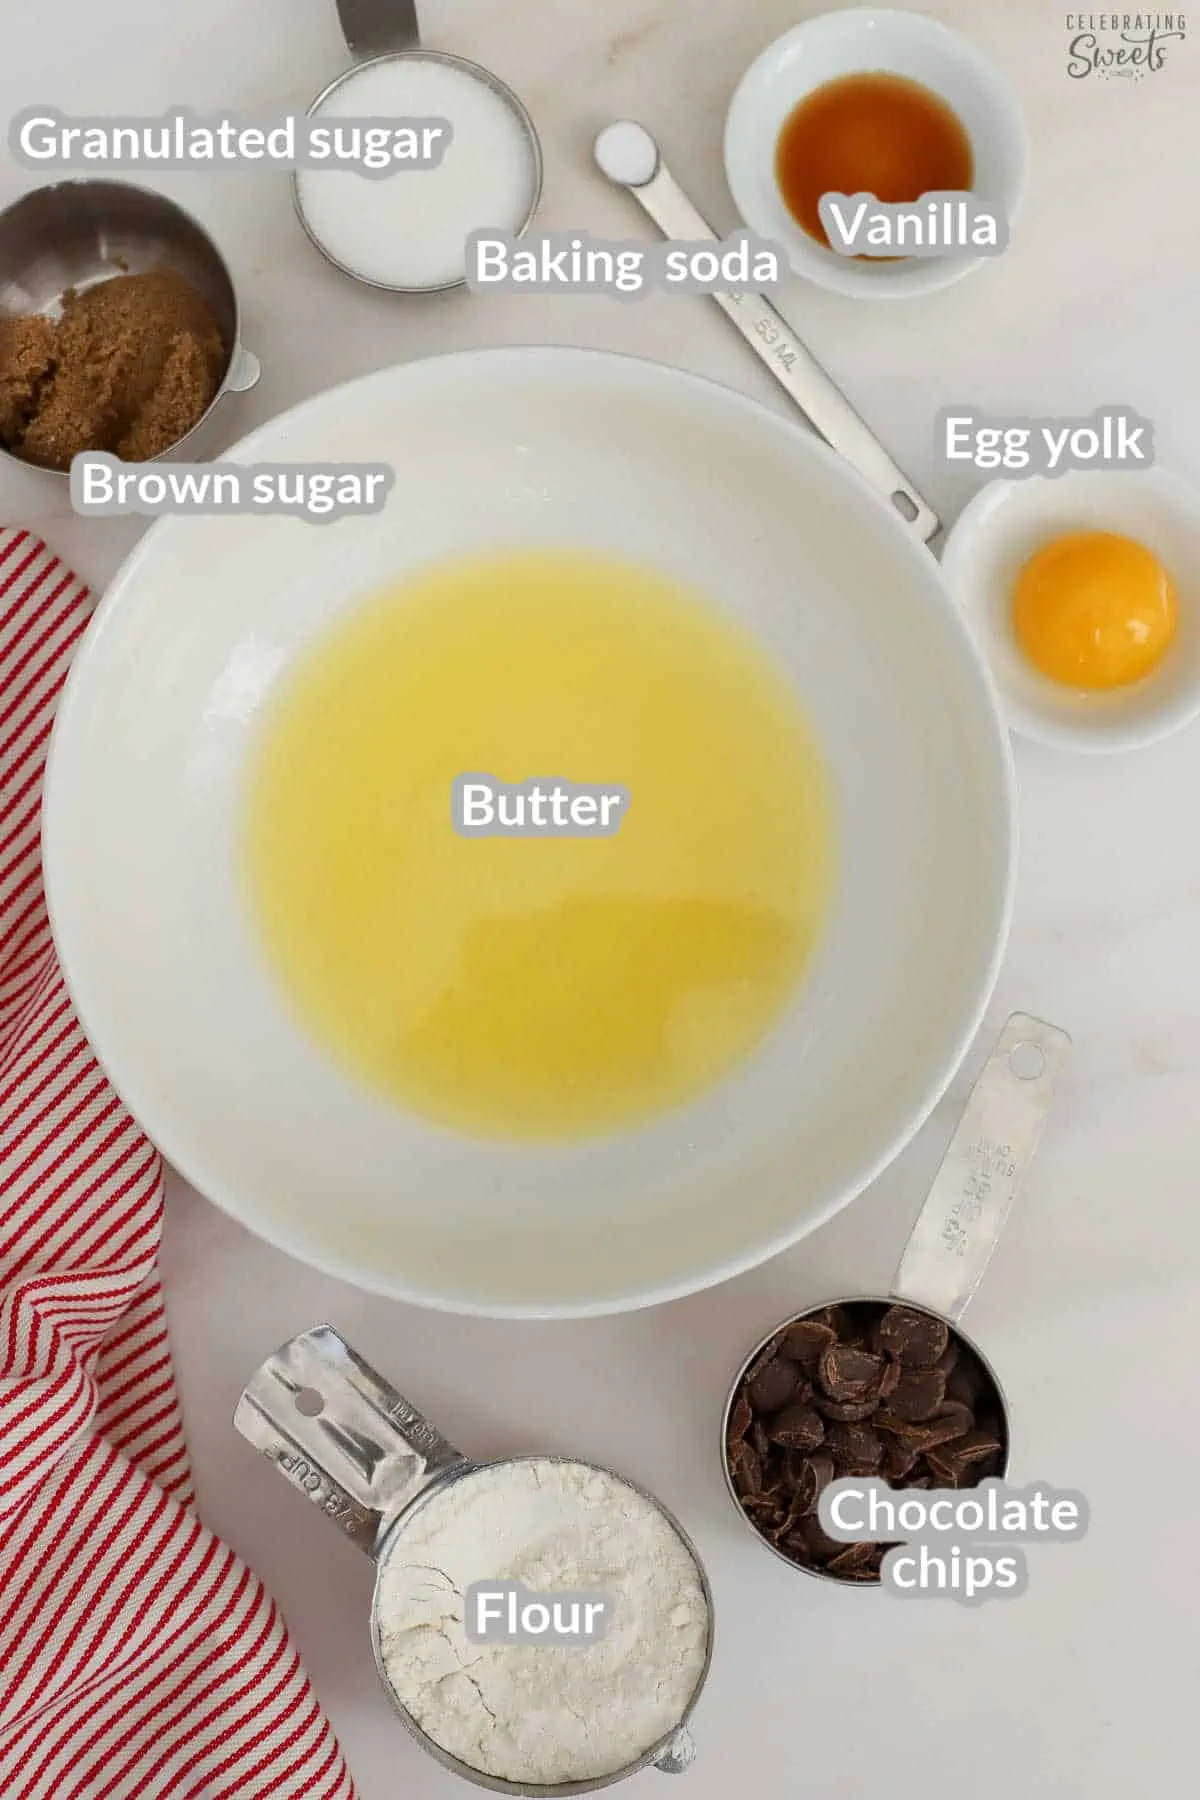 Ingredients for chocolate chip cookies: butter, sugar, flour, egg, chocolate chips. vanilla